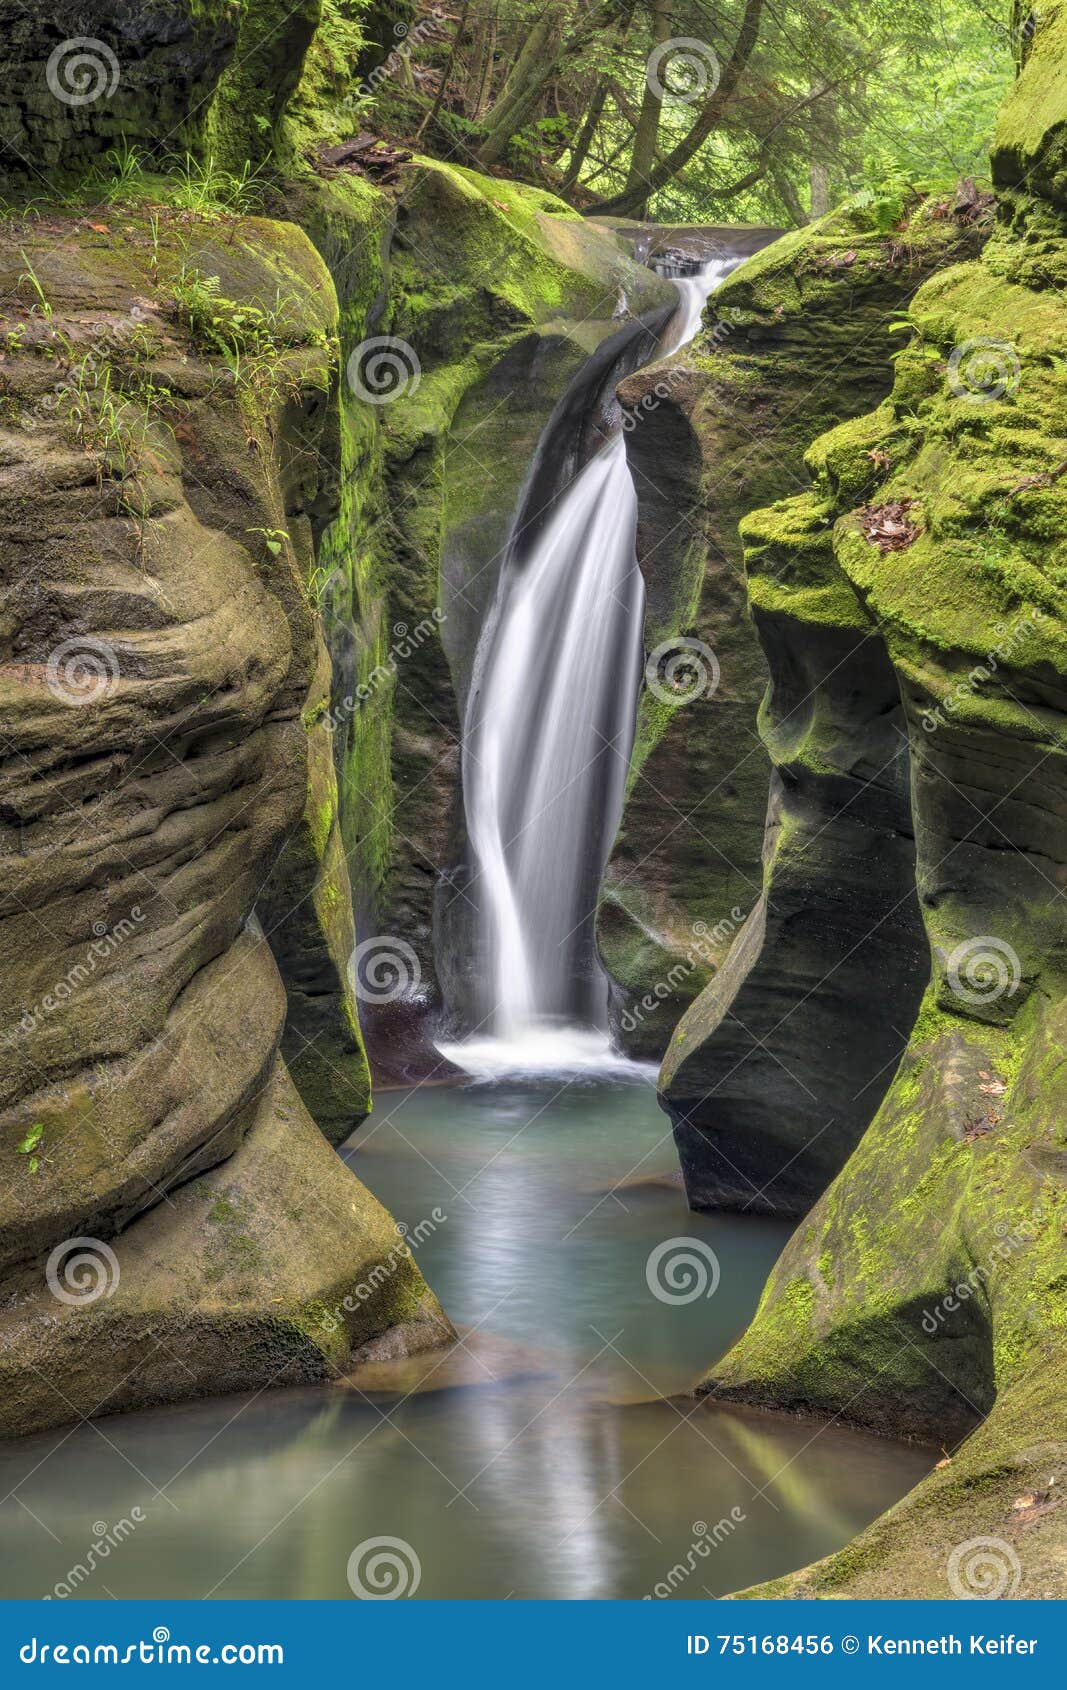 secluded waterfall